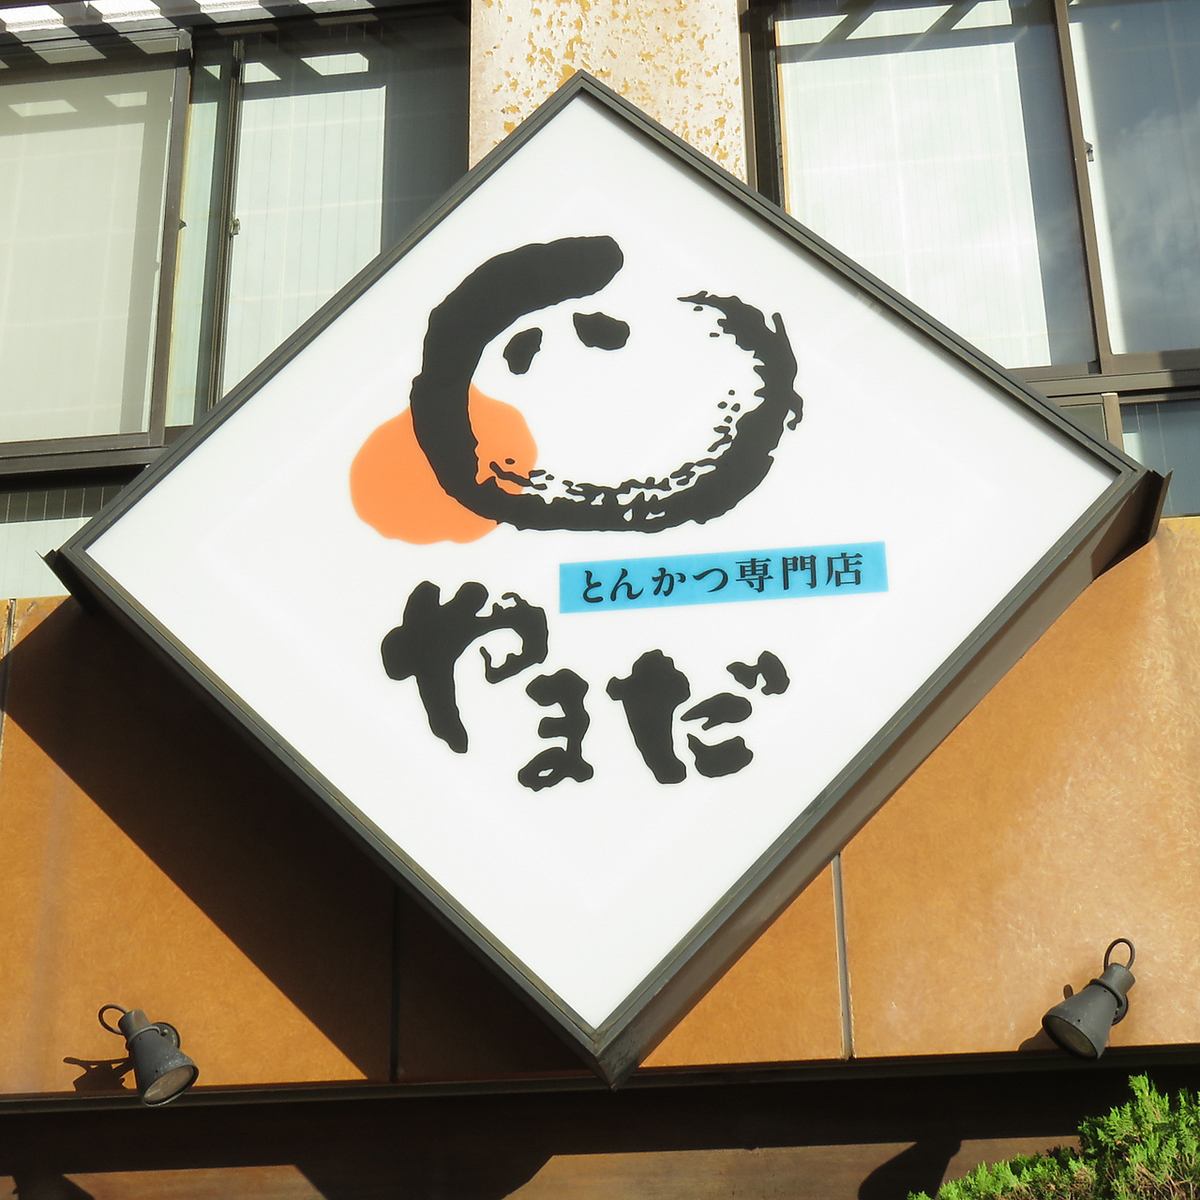 A long-established pork cutlet specialty store founded in Urayasu for 40 years!